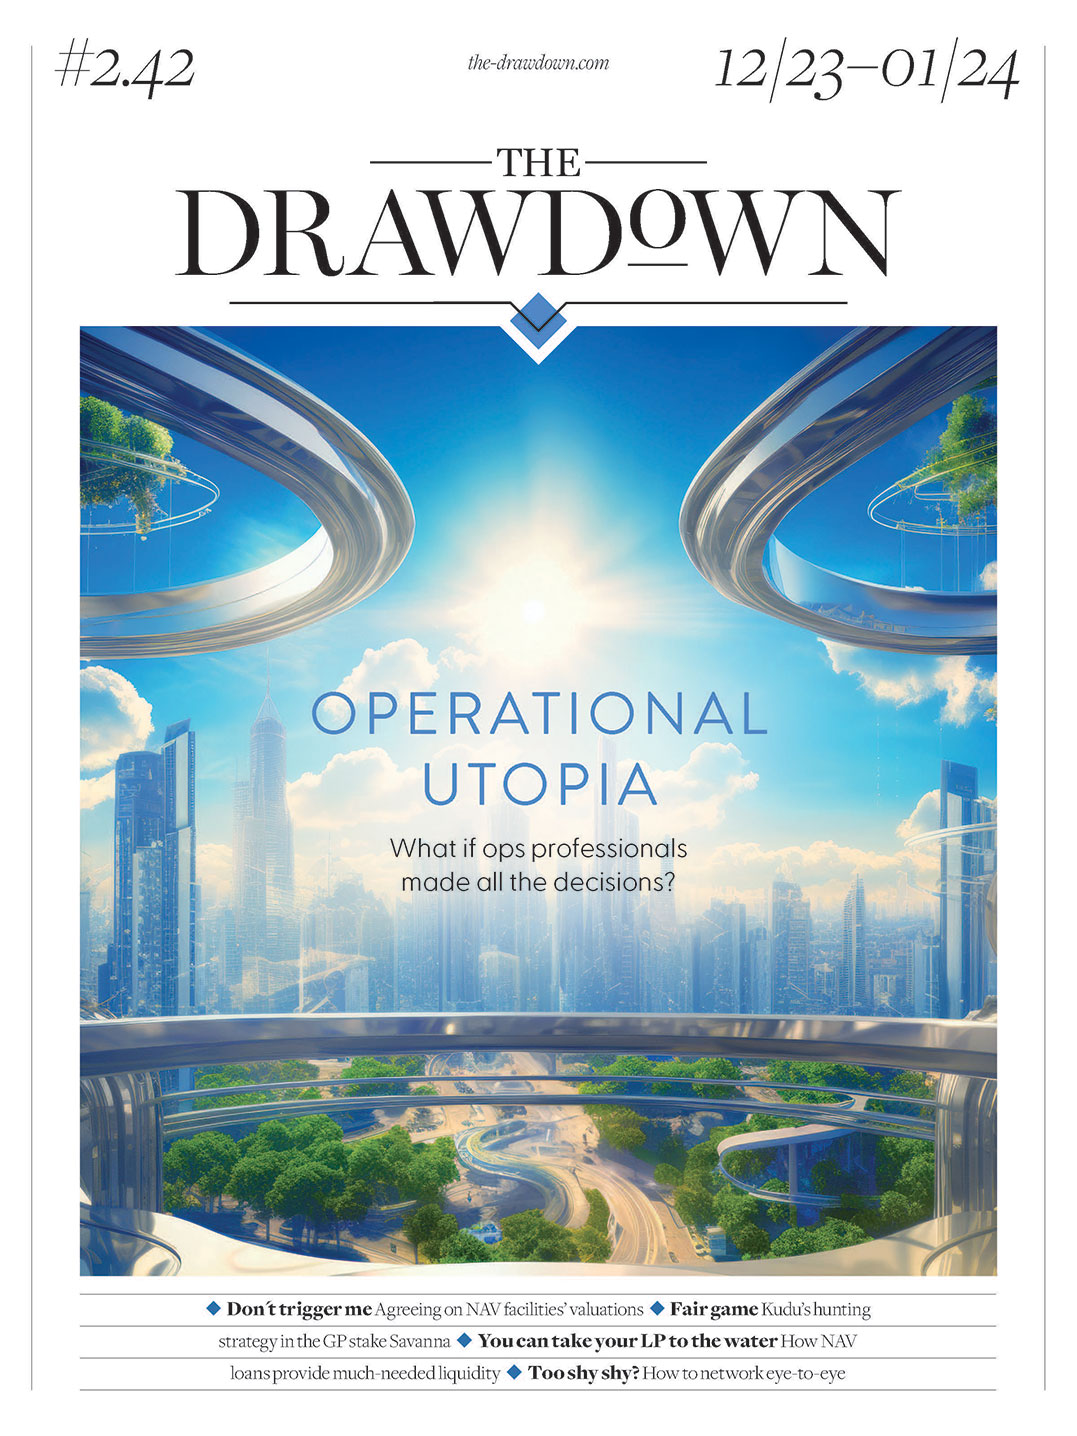 The Drawdown Issue December 2023/January 2024 Cover